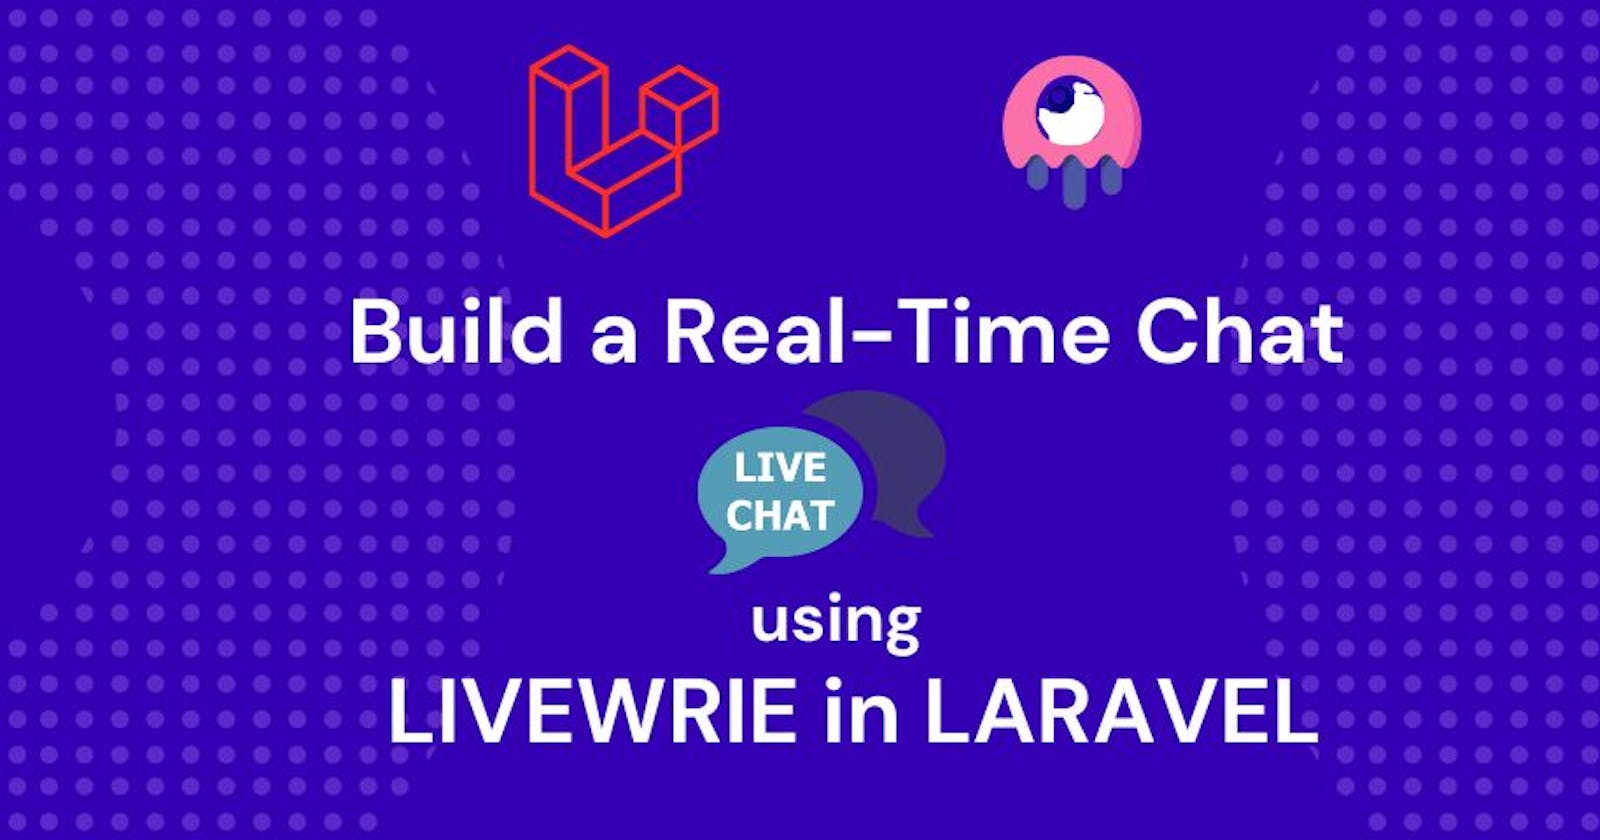 How to Build a Real-Time Chat Module in Laravel using Livewire